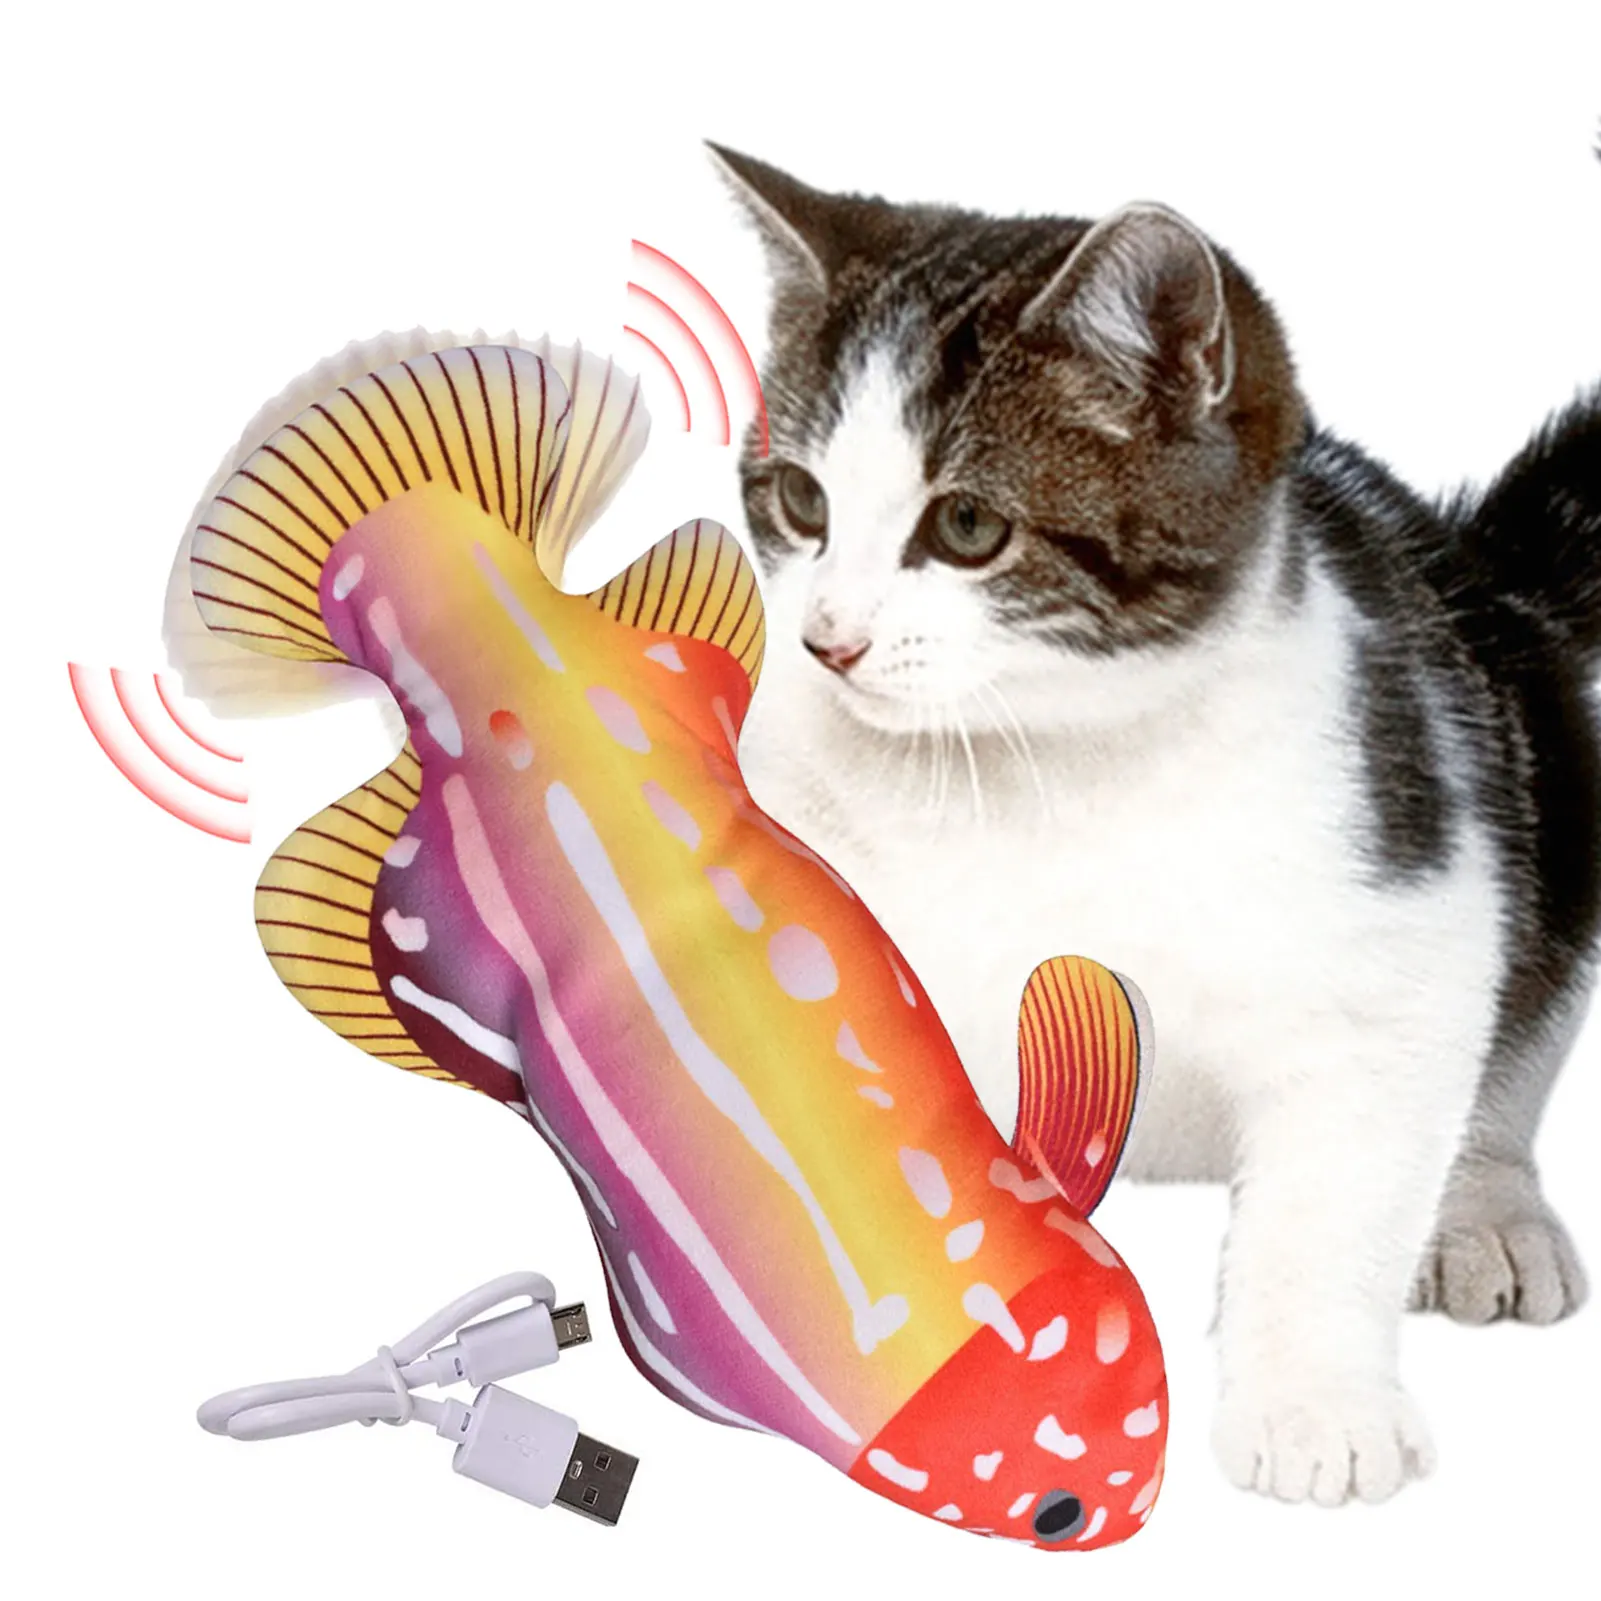 Floppy Fish Cat Toy Moving Fish Toy For Cats Interactive Flopping Cat Kicker Fish Toy Dancing Wiggle Fish Catnip Toys